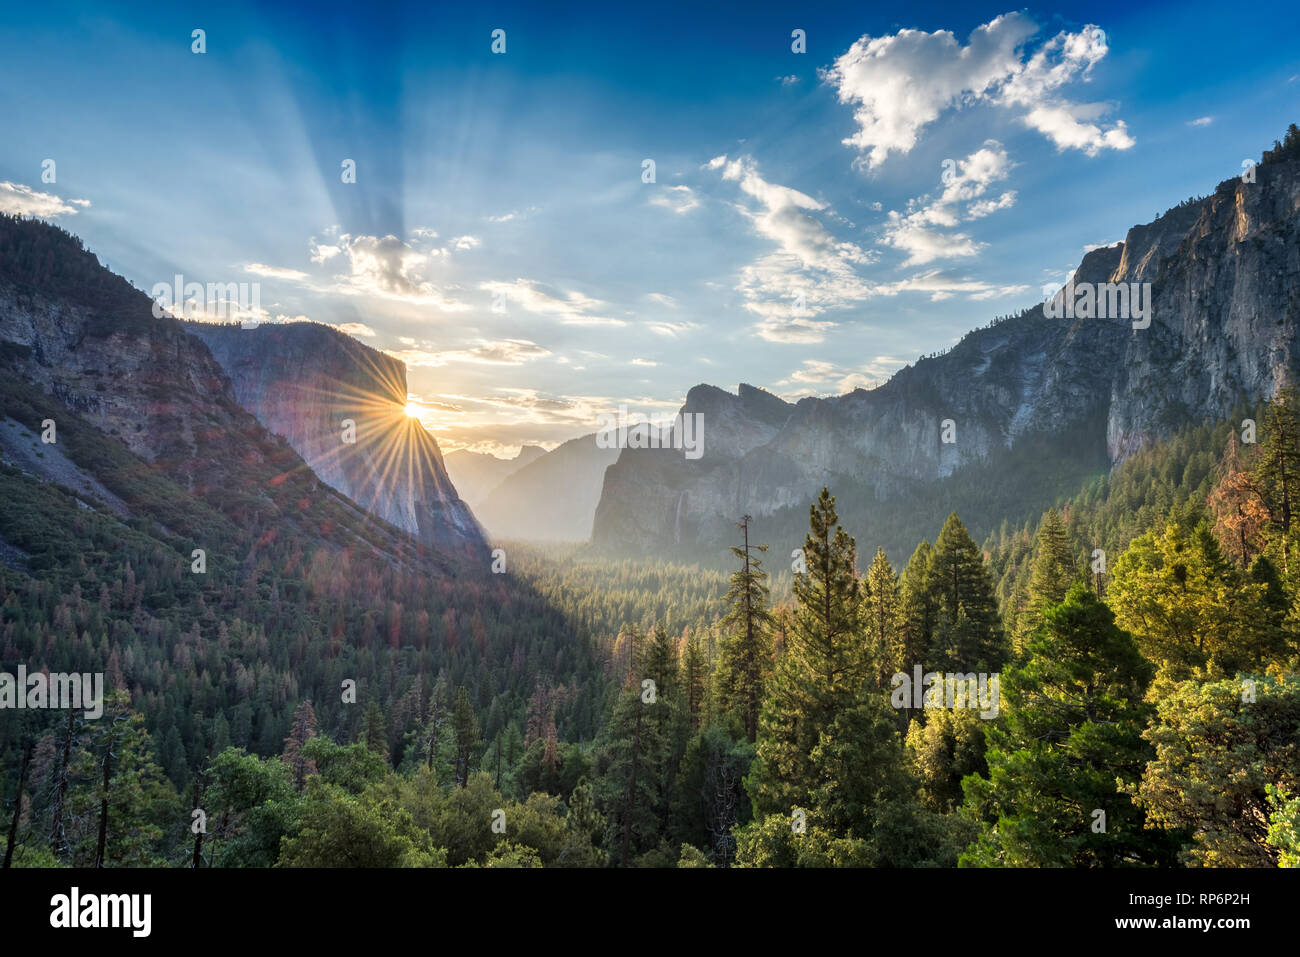 Sunrise at Yosemite Park in California, from Tunnel View vista point Stock Photo